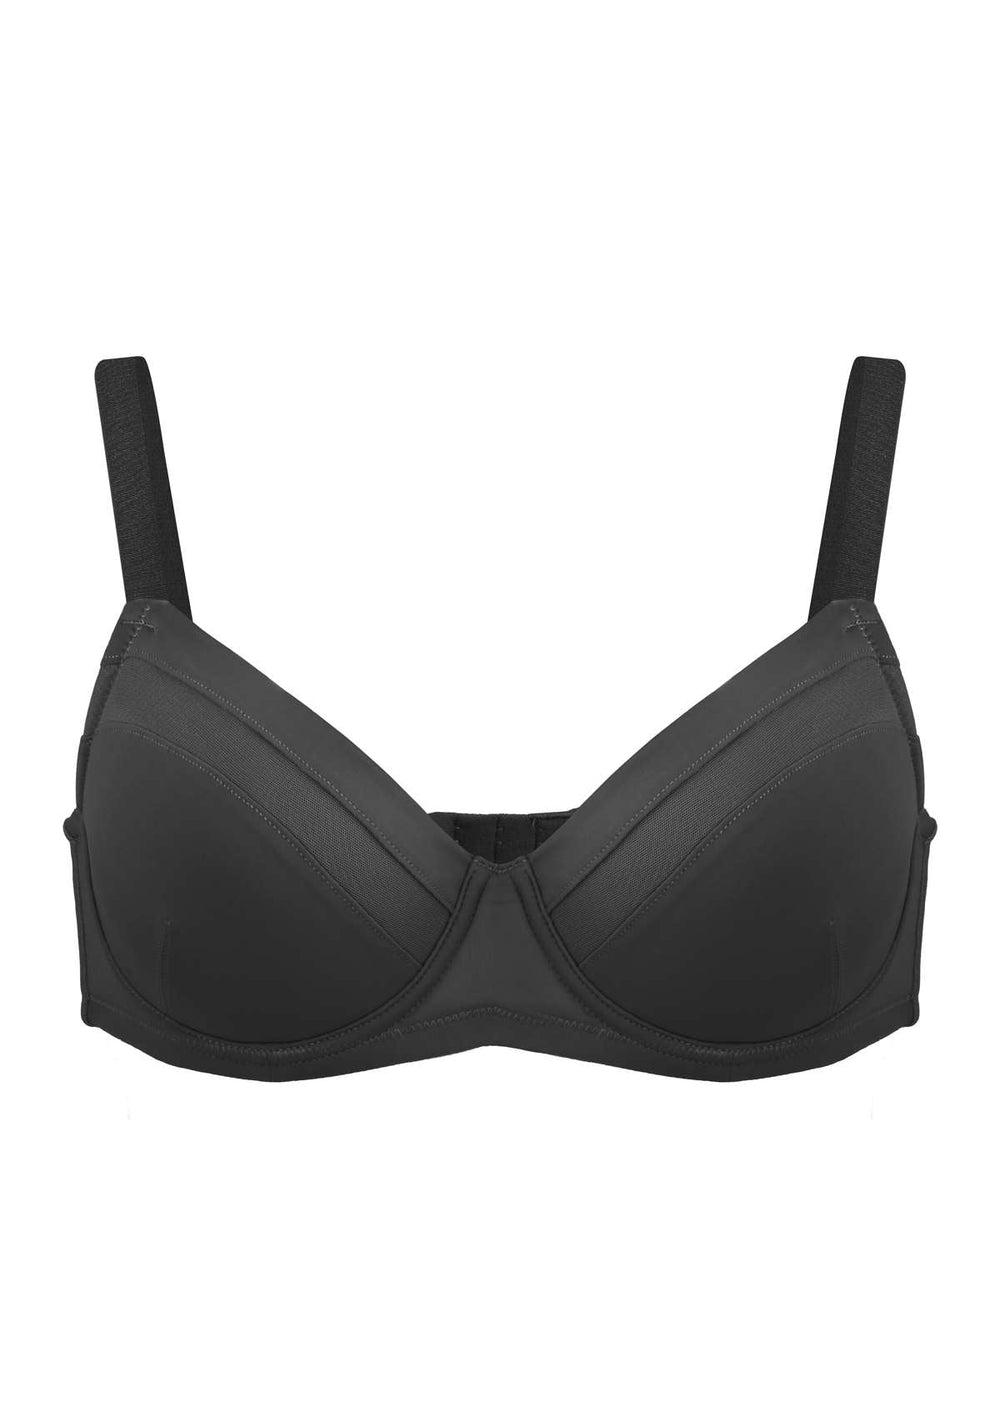 WOOLWORTHS - Find your perfect fit! The perfect bra feels as good